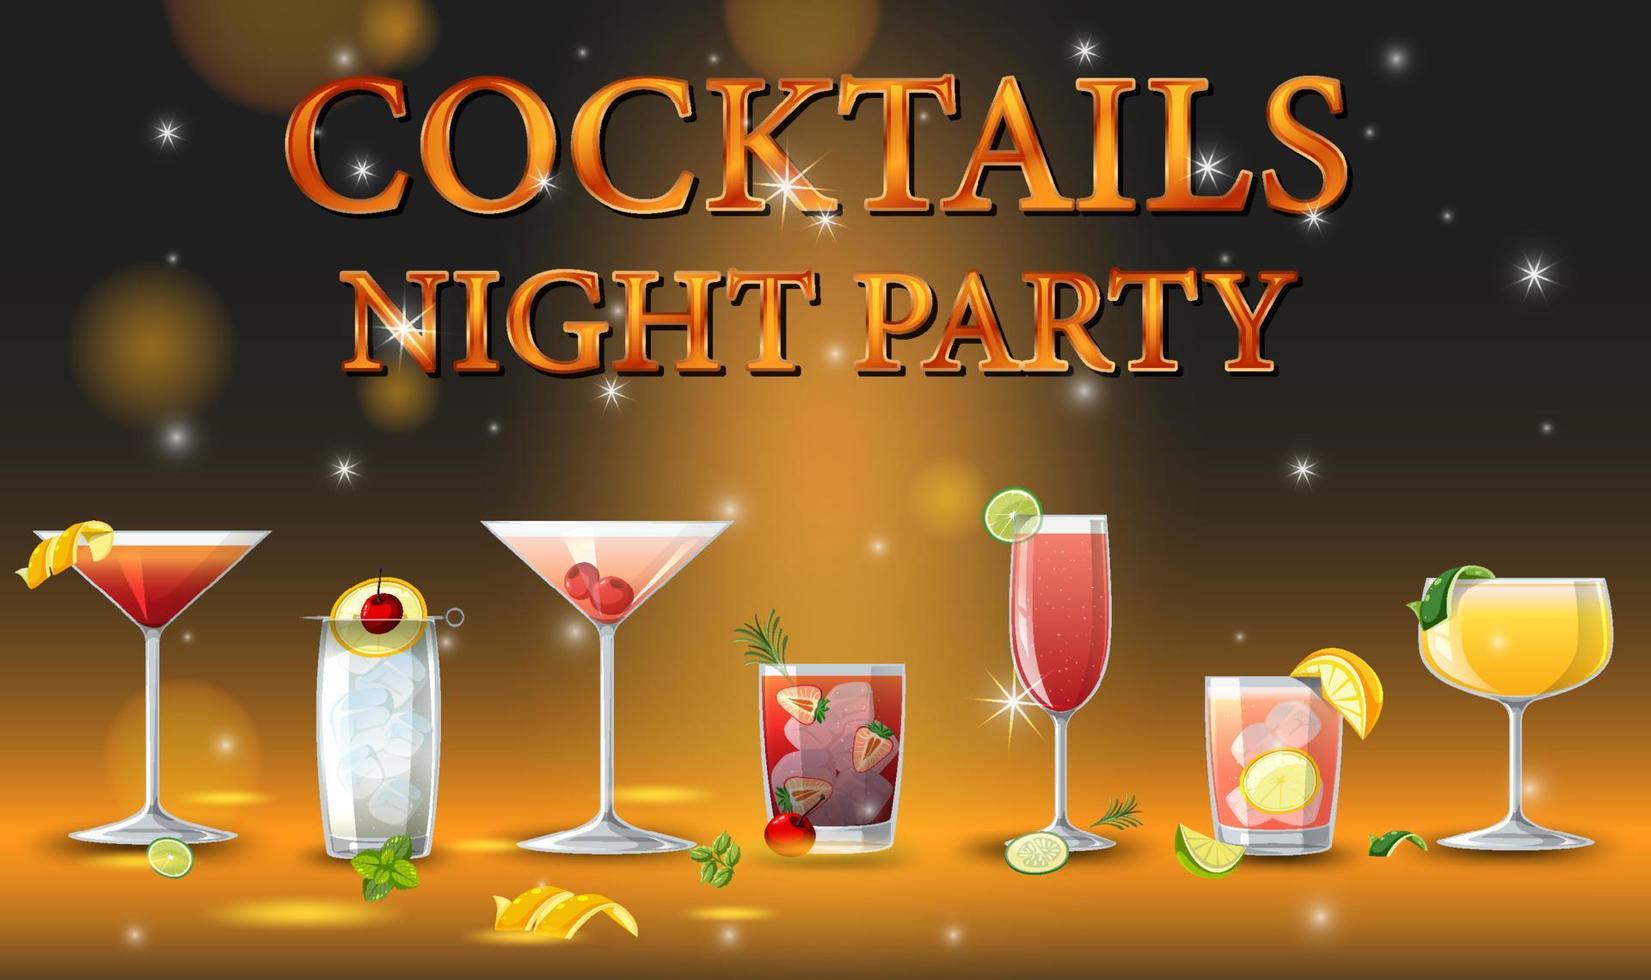 Cocktail-Nacht-Party-Banner vektor